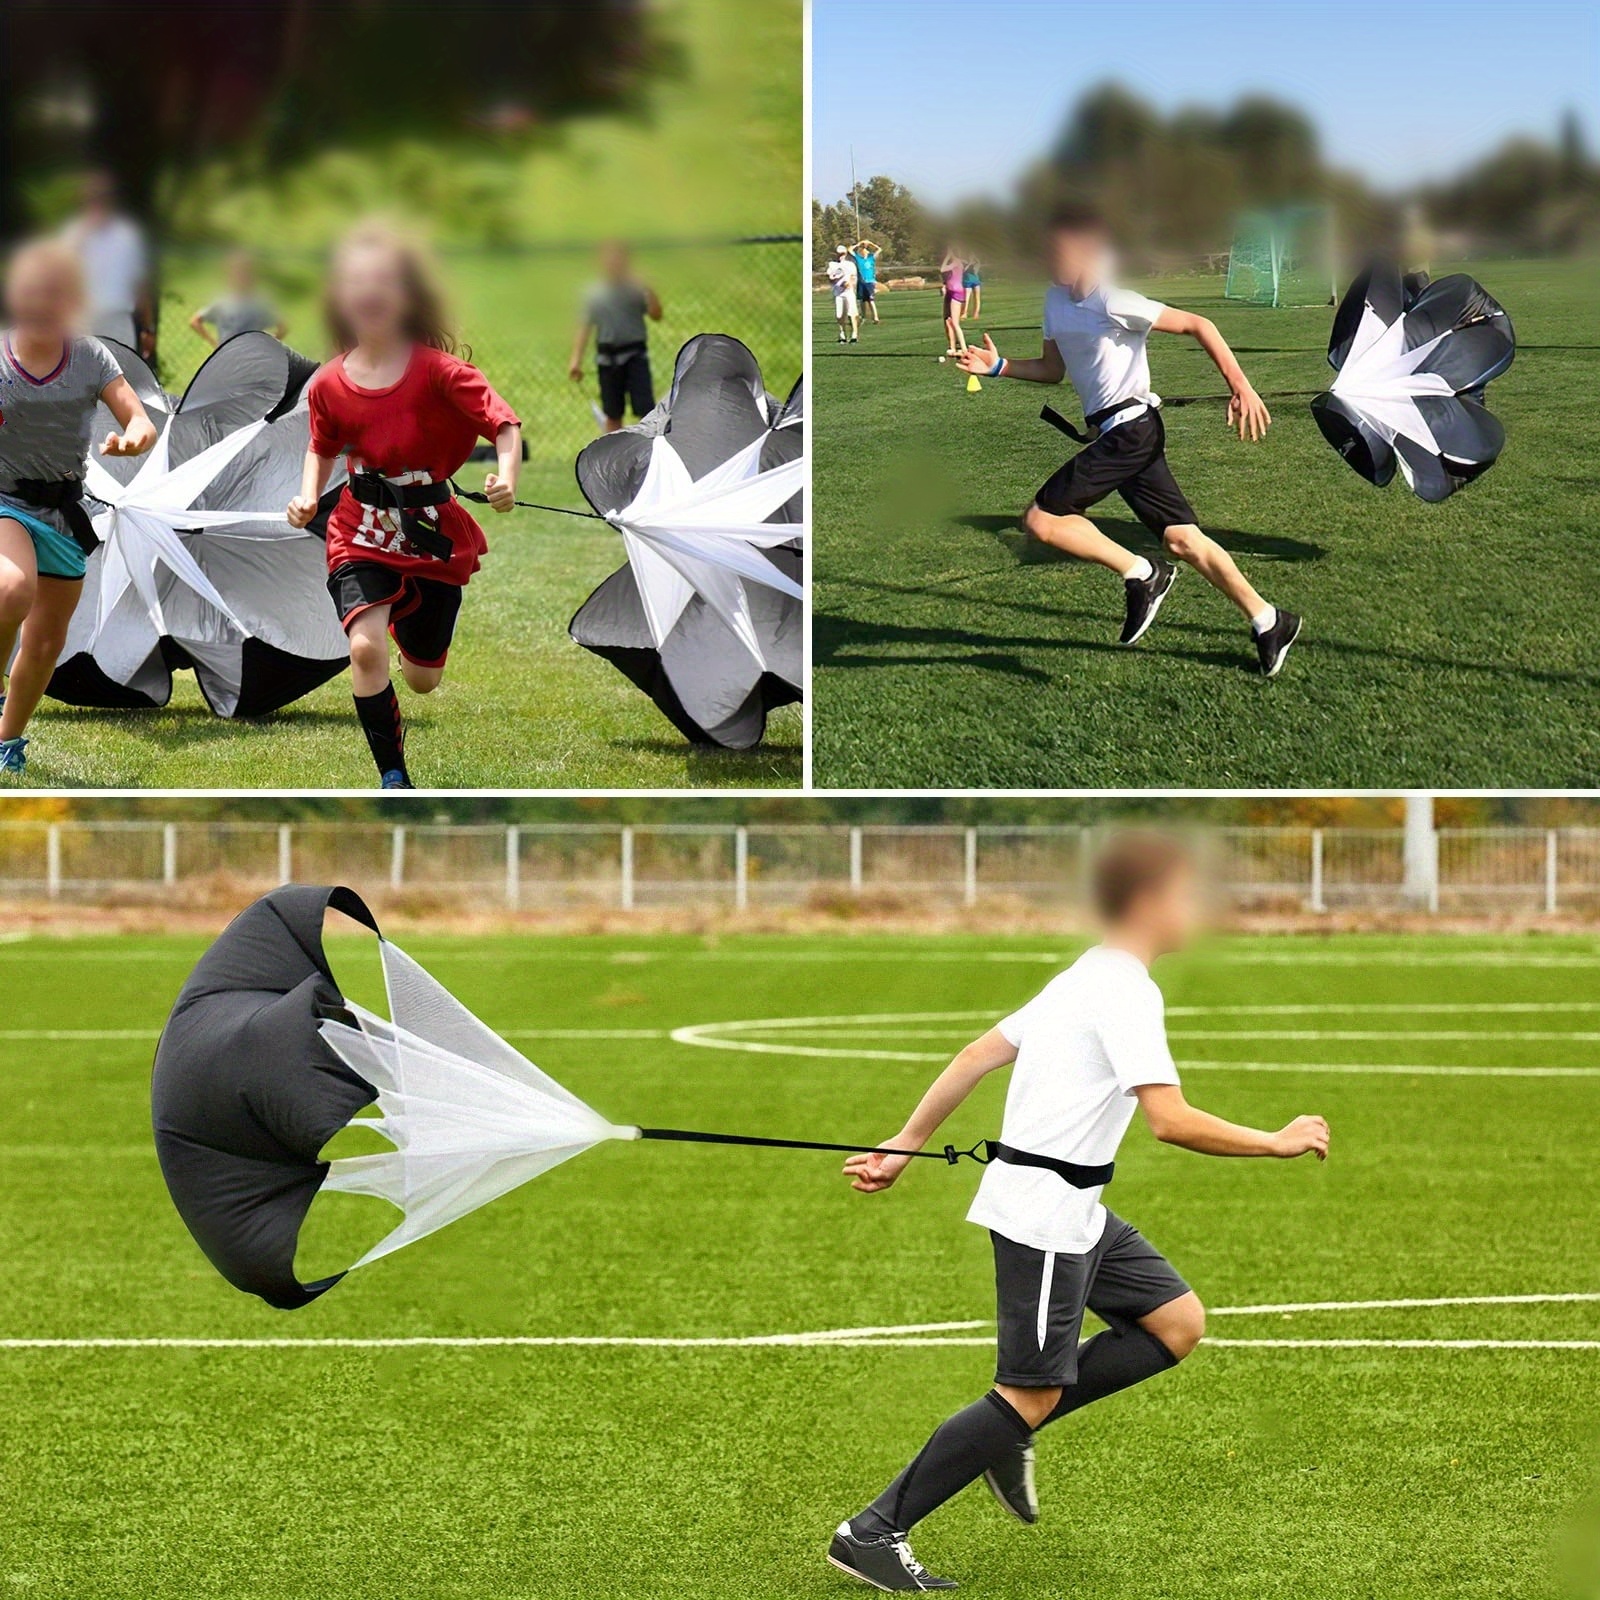 Youth Football Player Running with Parachute. Soccer Football